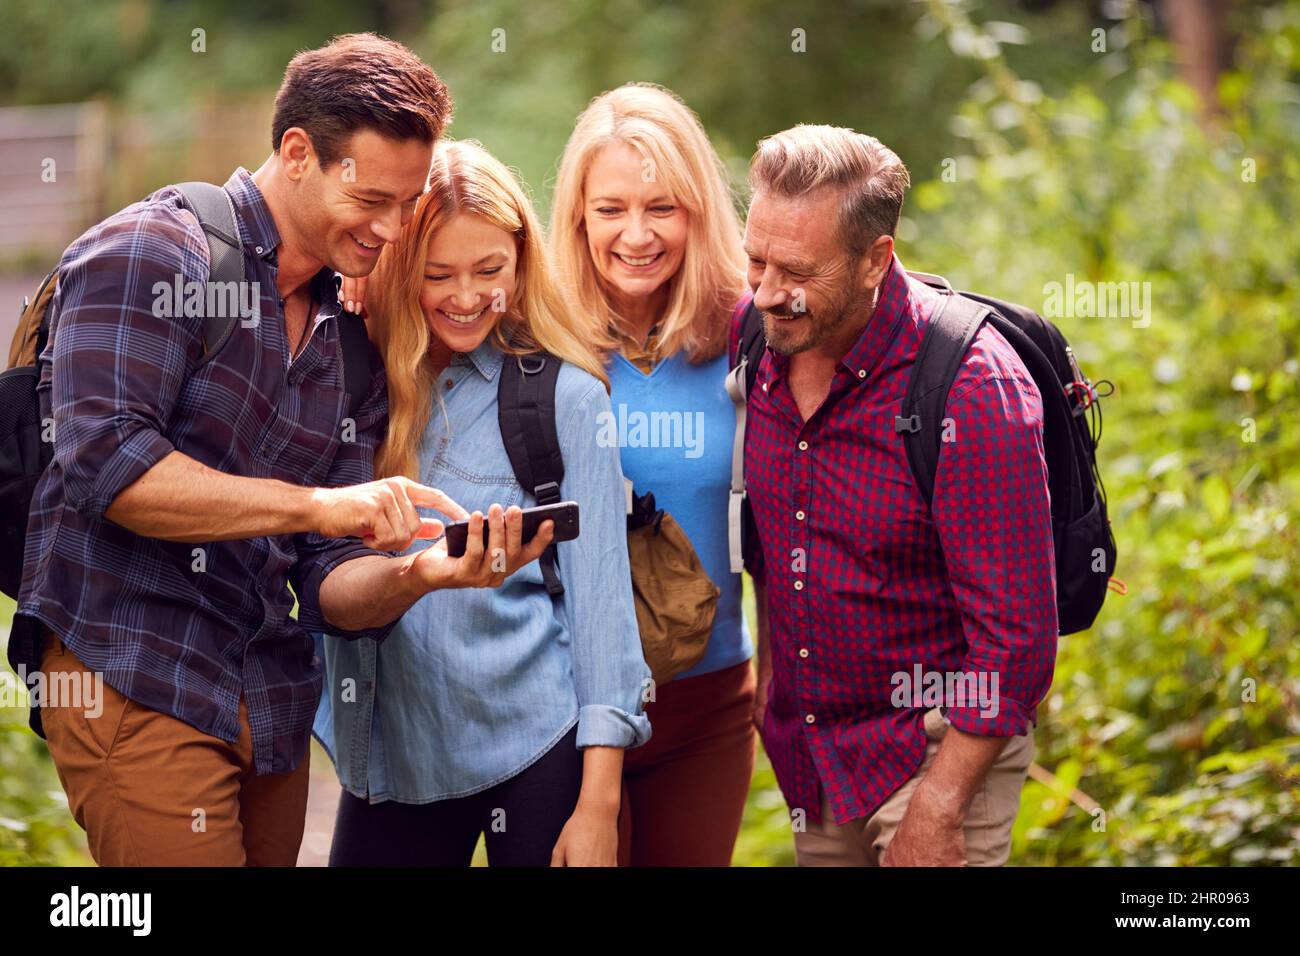 Group Of Friends Hiking In Countryside Looking At Picture On Phone As They Hike Along Path Stock Photo